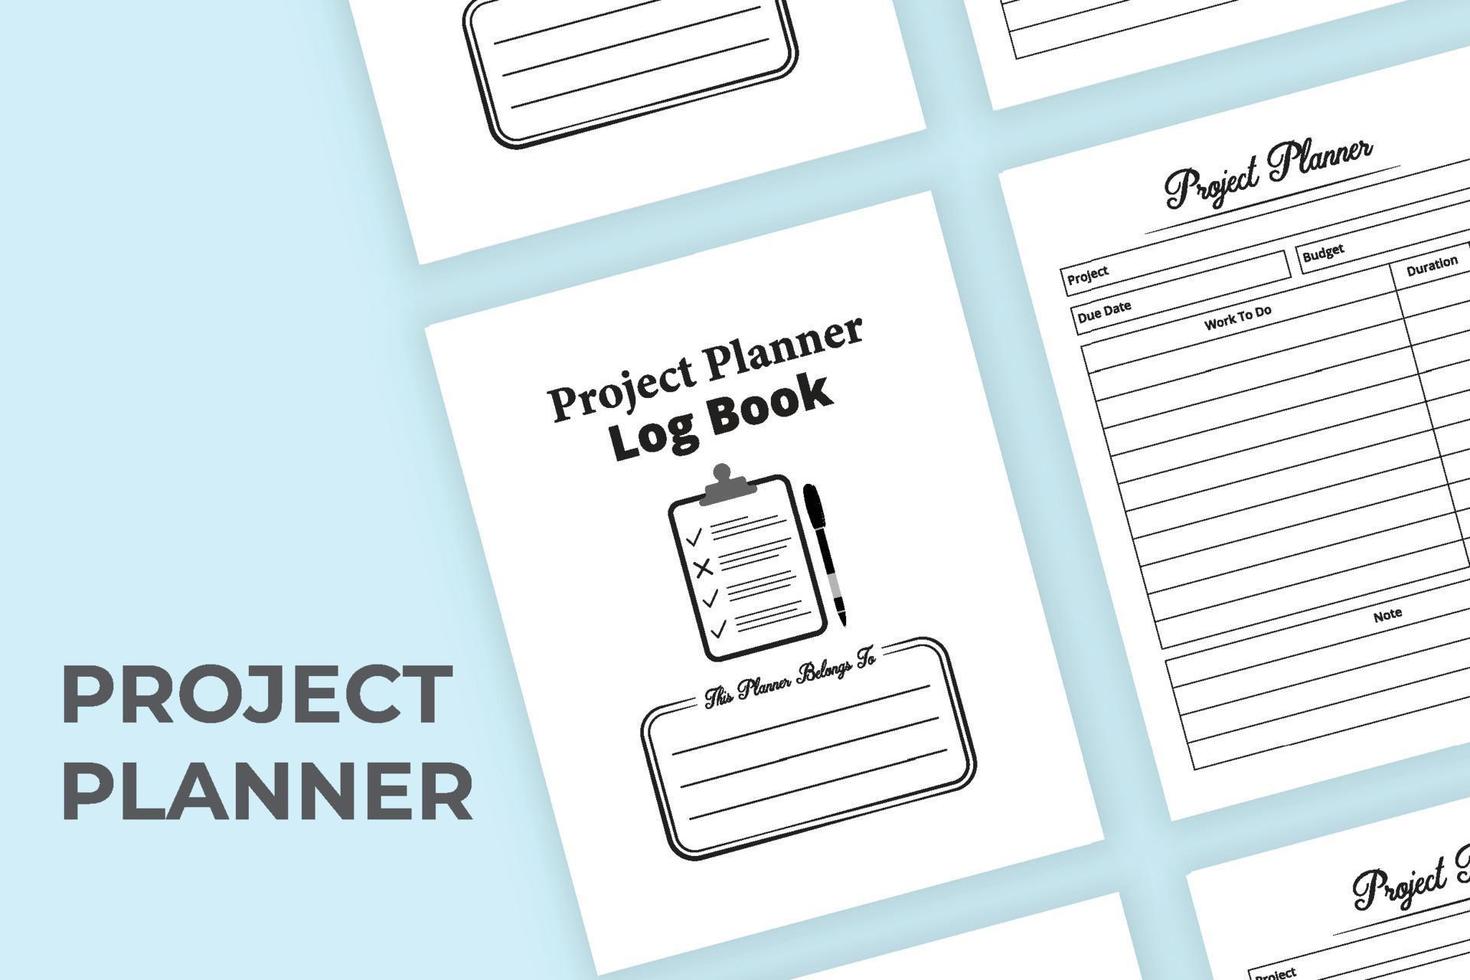 Project planner notebook interior. Task planner logbook. Work planner checklist. Work list notebook. Business management logbook. Project planner journal and task tracker. vector